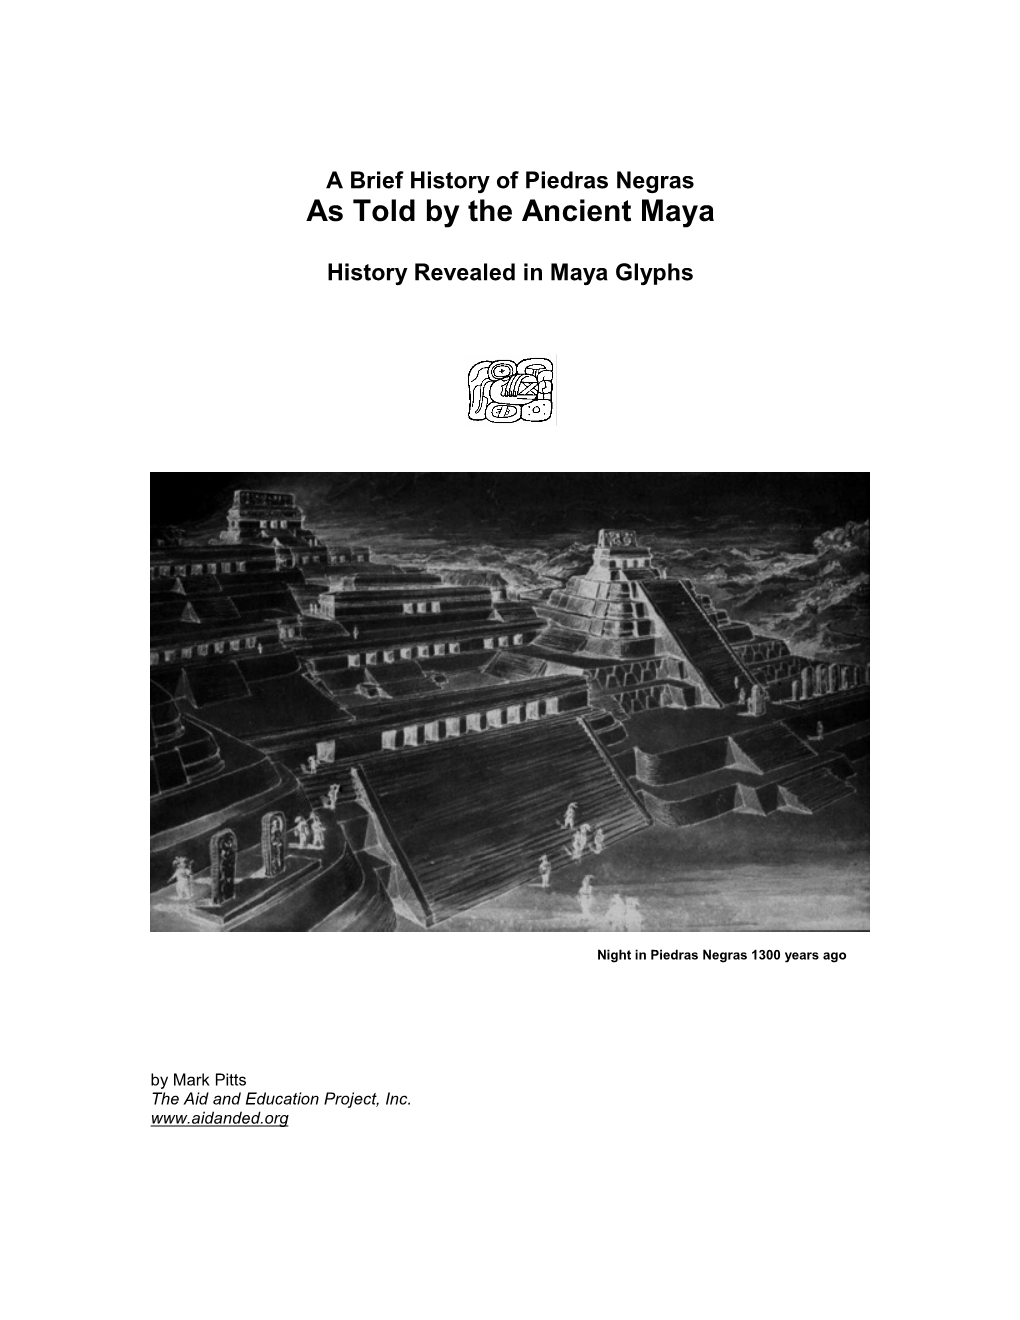 Piedras Negras As Told by the Ancient Maya